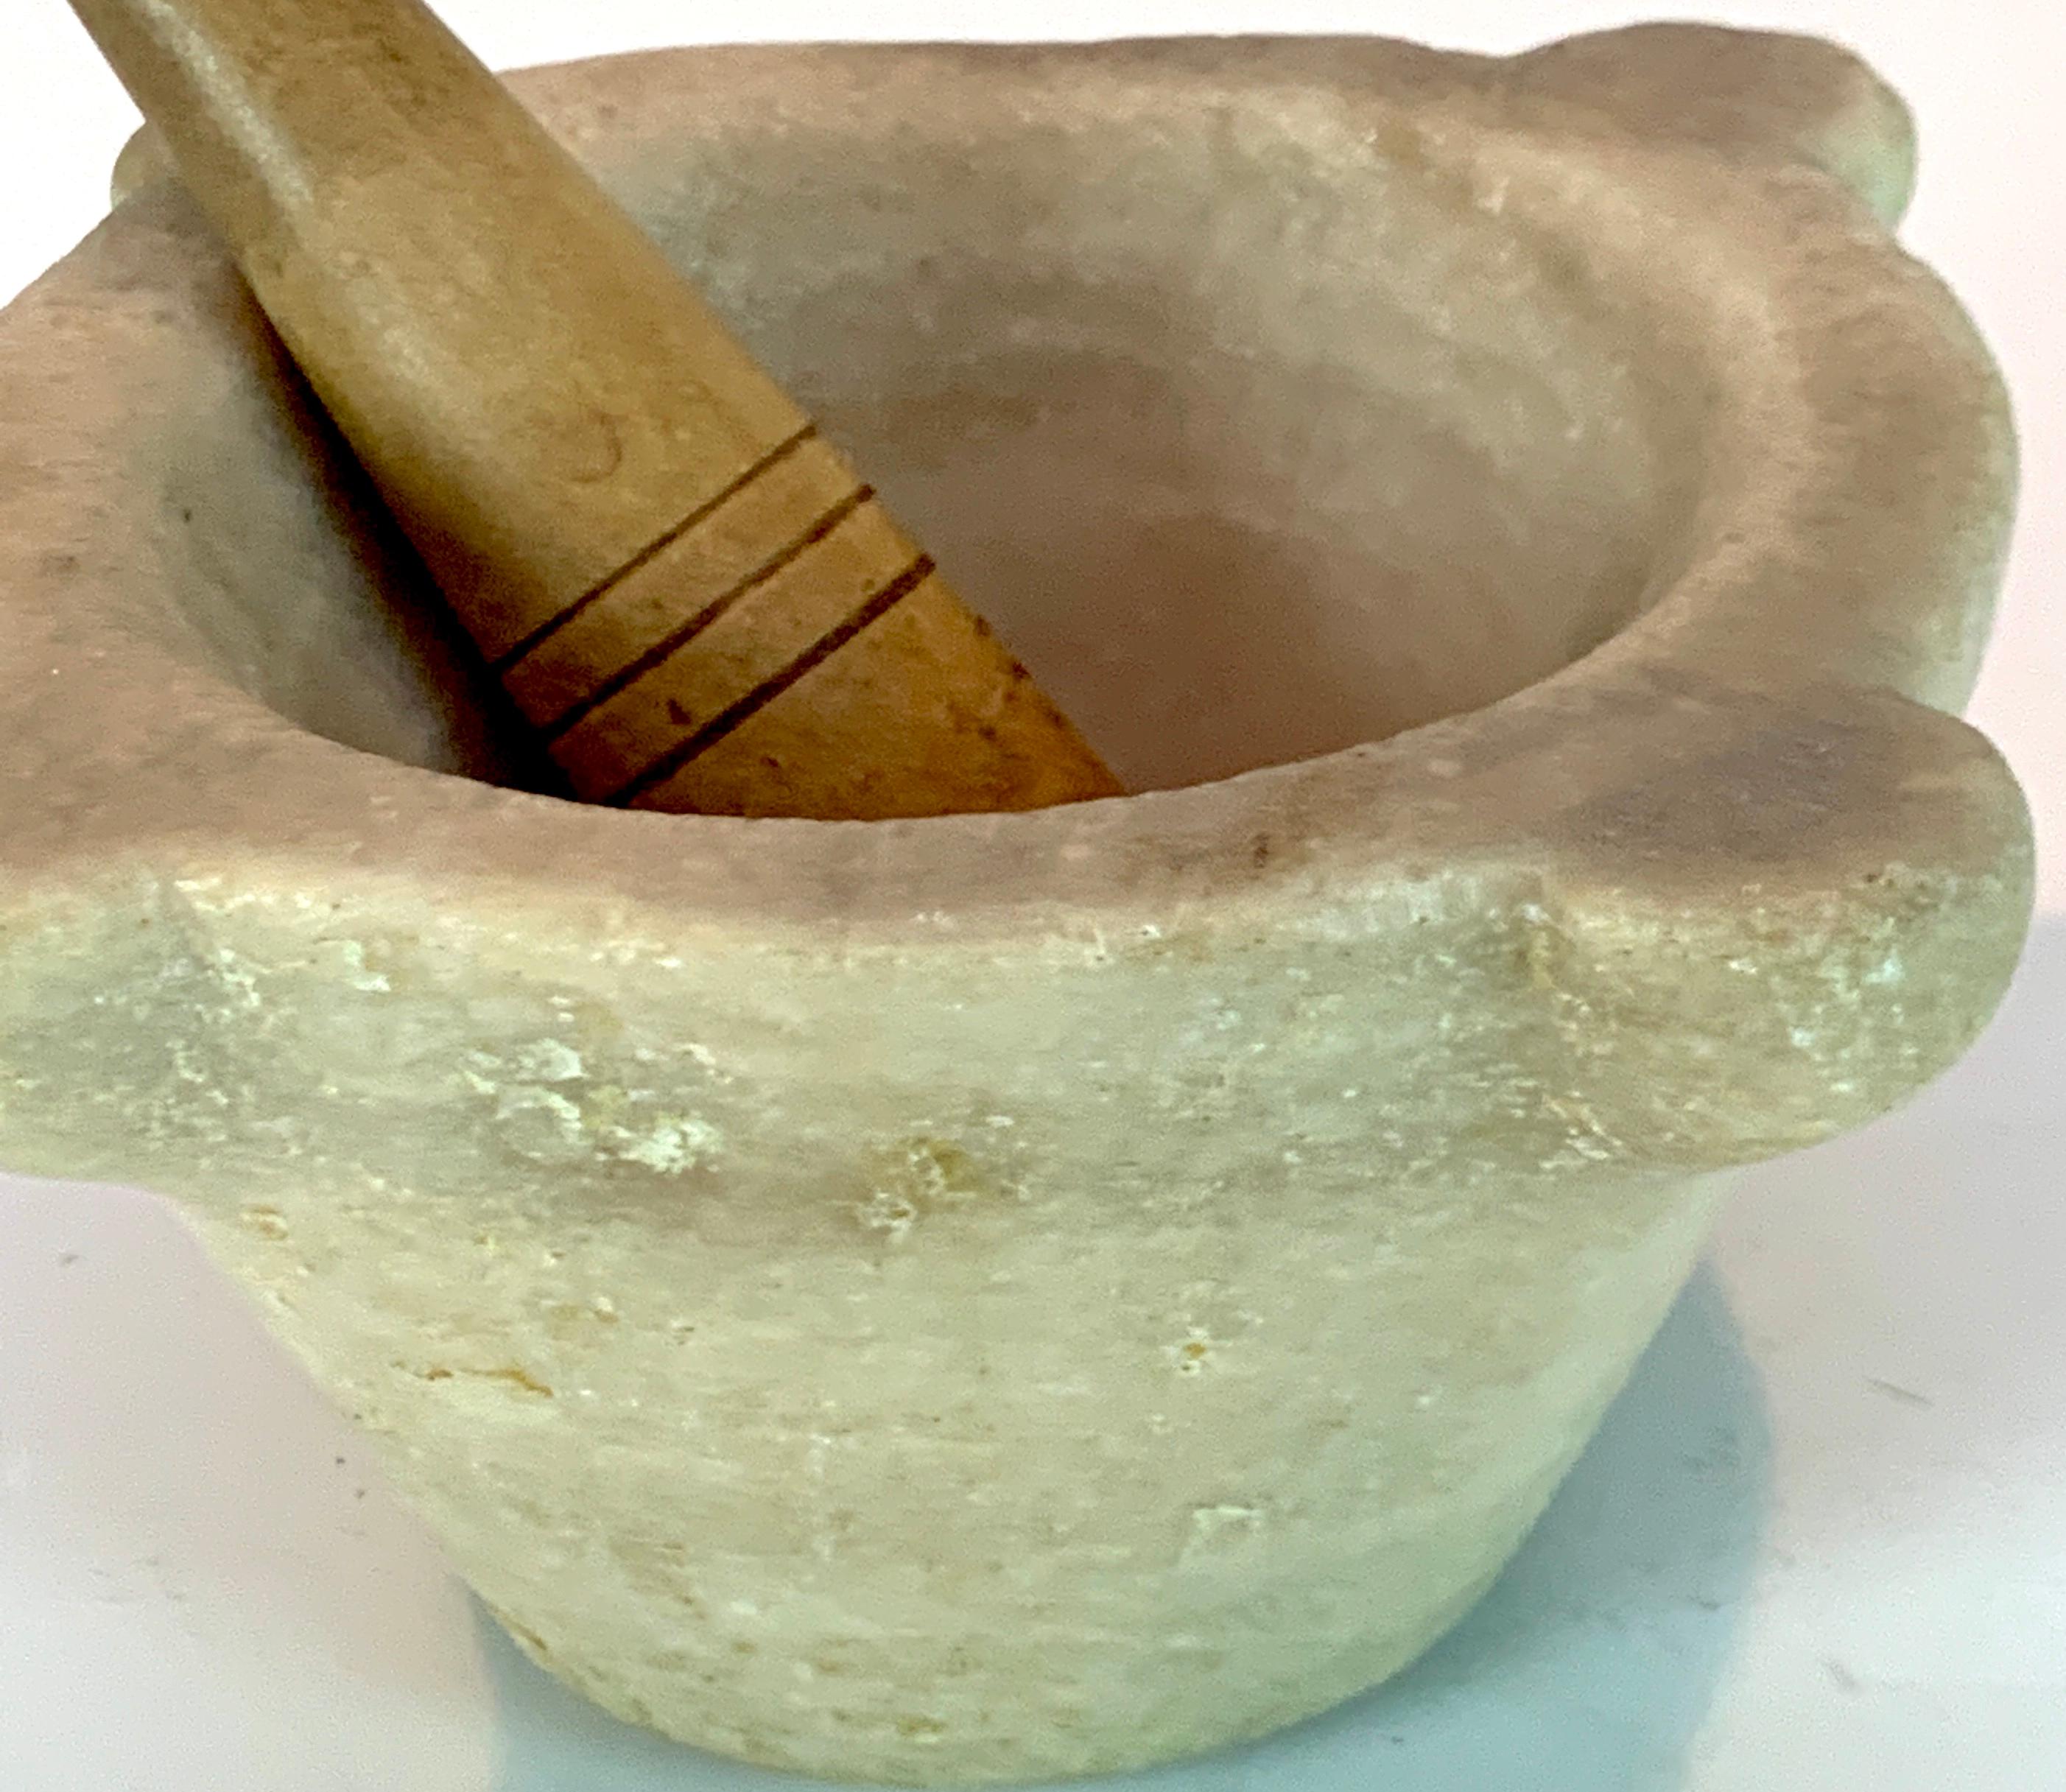 Antique Italian marble mortar and pestle, the mortar measures 6-inches in diameter x 4-inches high
with a carved drain spout. The interior measures 4.5- inches in diameter x 4- inches deep. The pestal (later) measures 7-inches long x 1.75 -inch